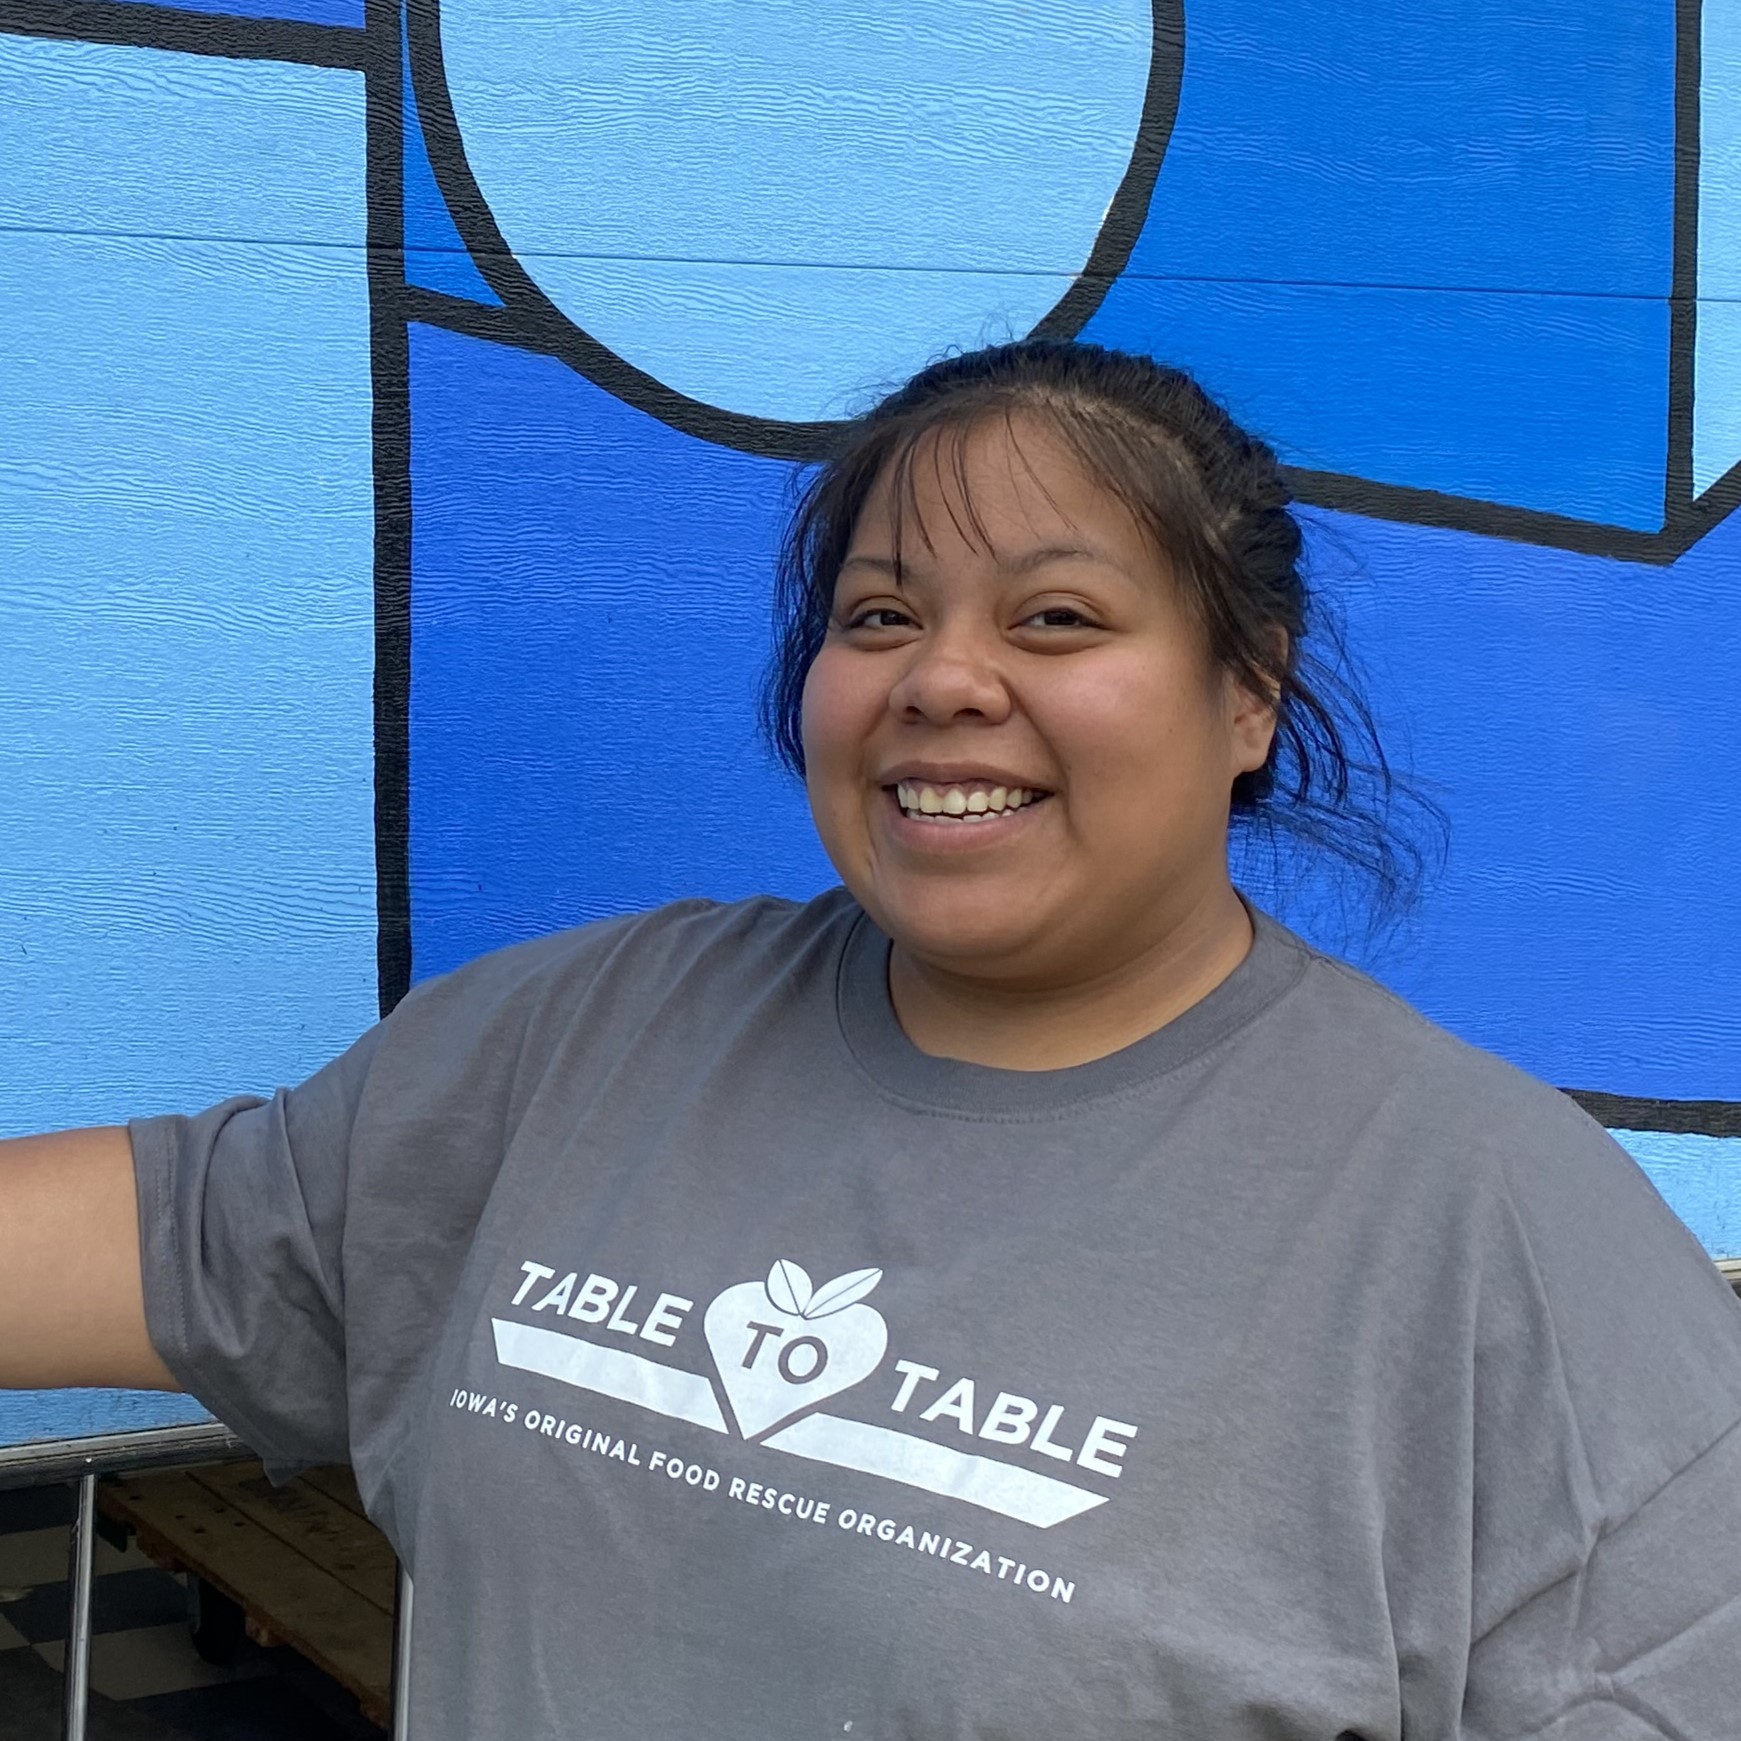 Yesenia, wearing a gray shirt that says Table to Table, stands against a bright blue wall.